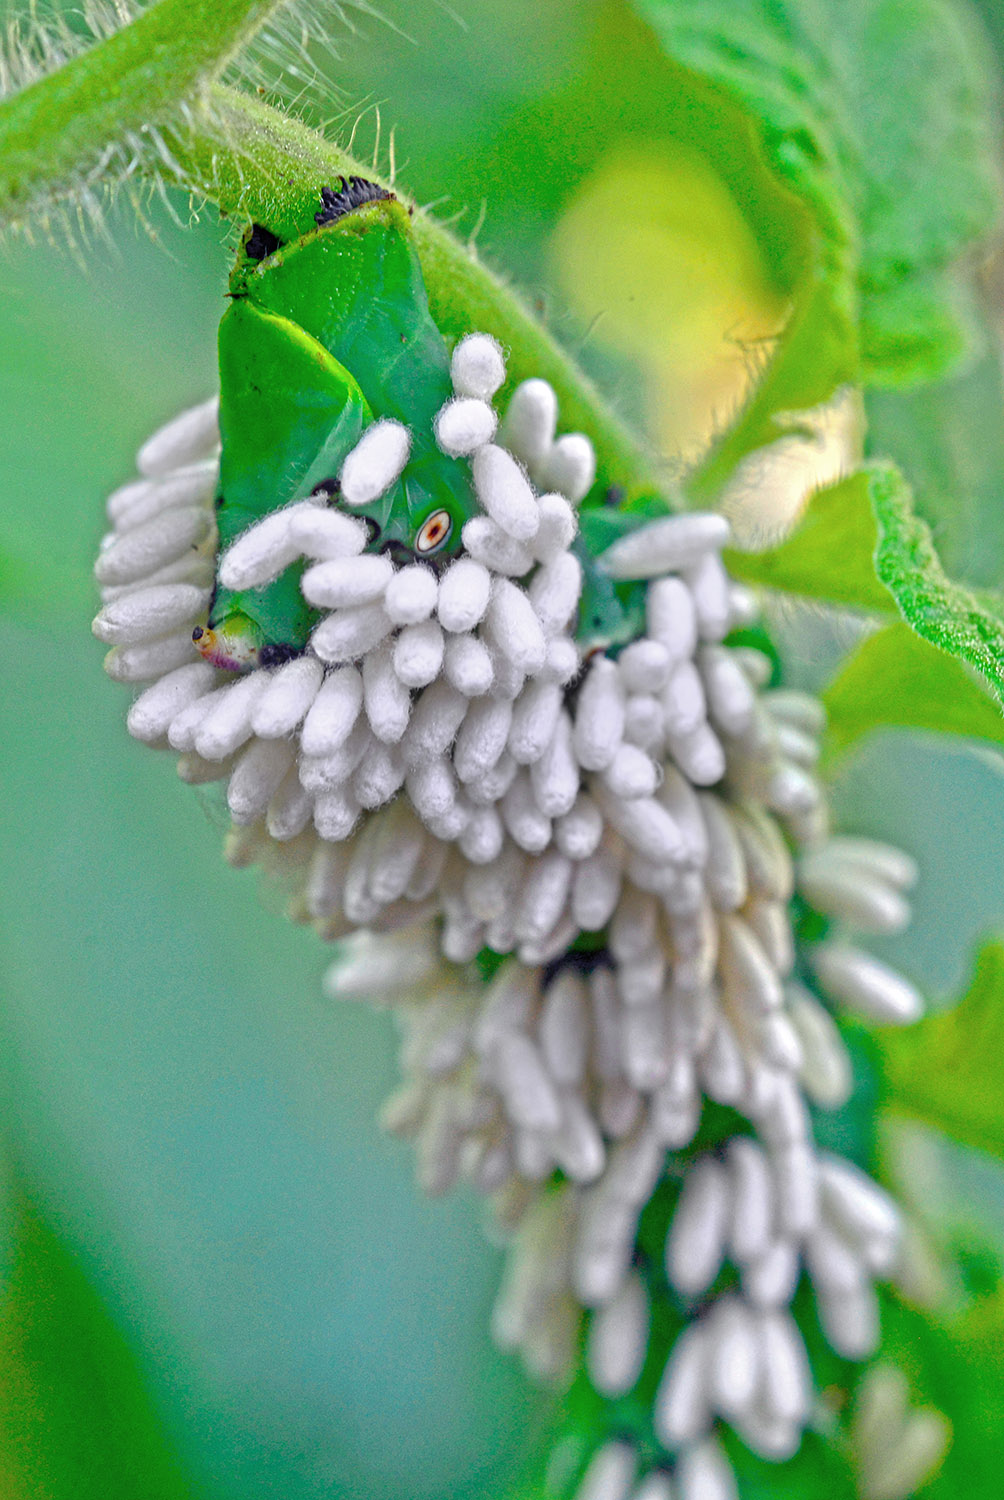 Tomato_Hornworm_Cocoons_Pupating_Wasps_Parasite_Insect.jpg